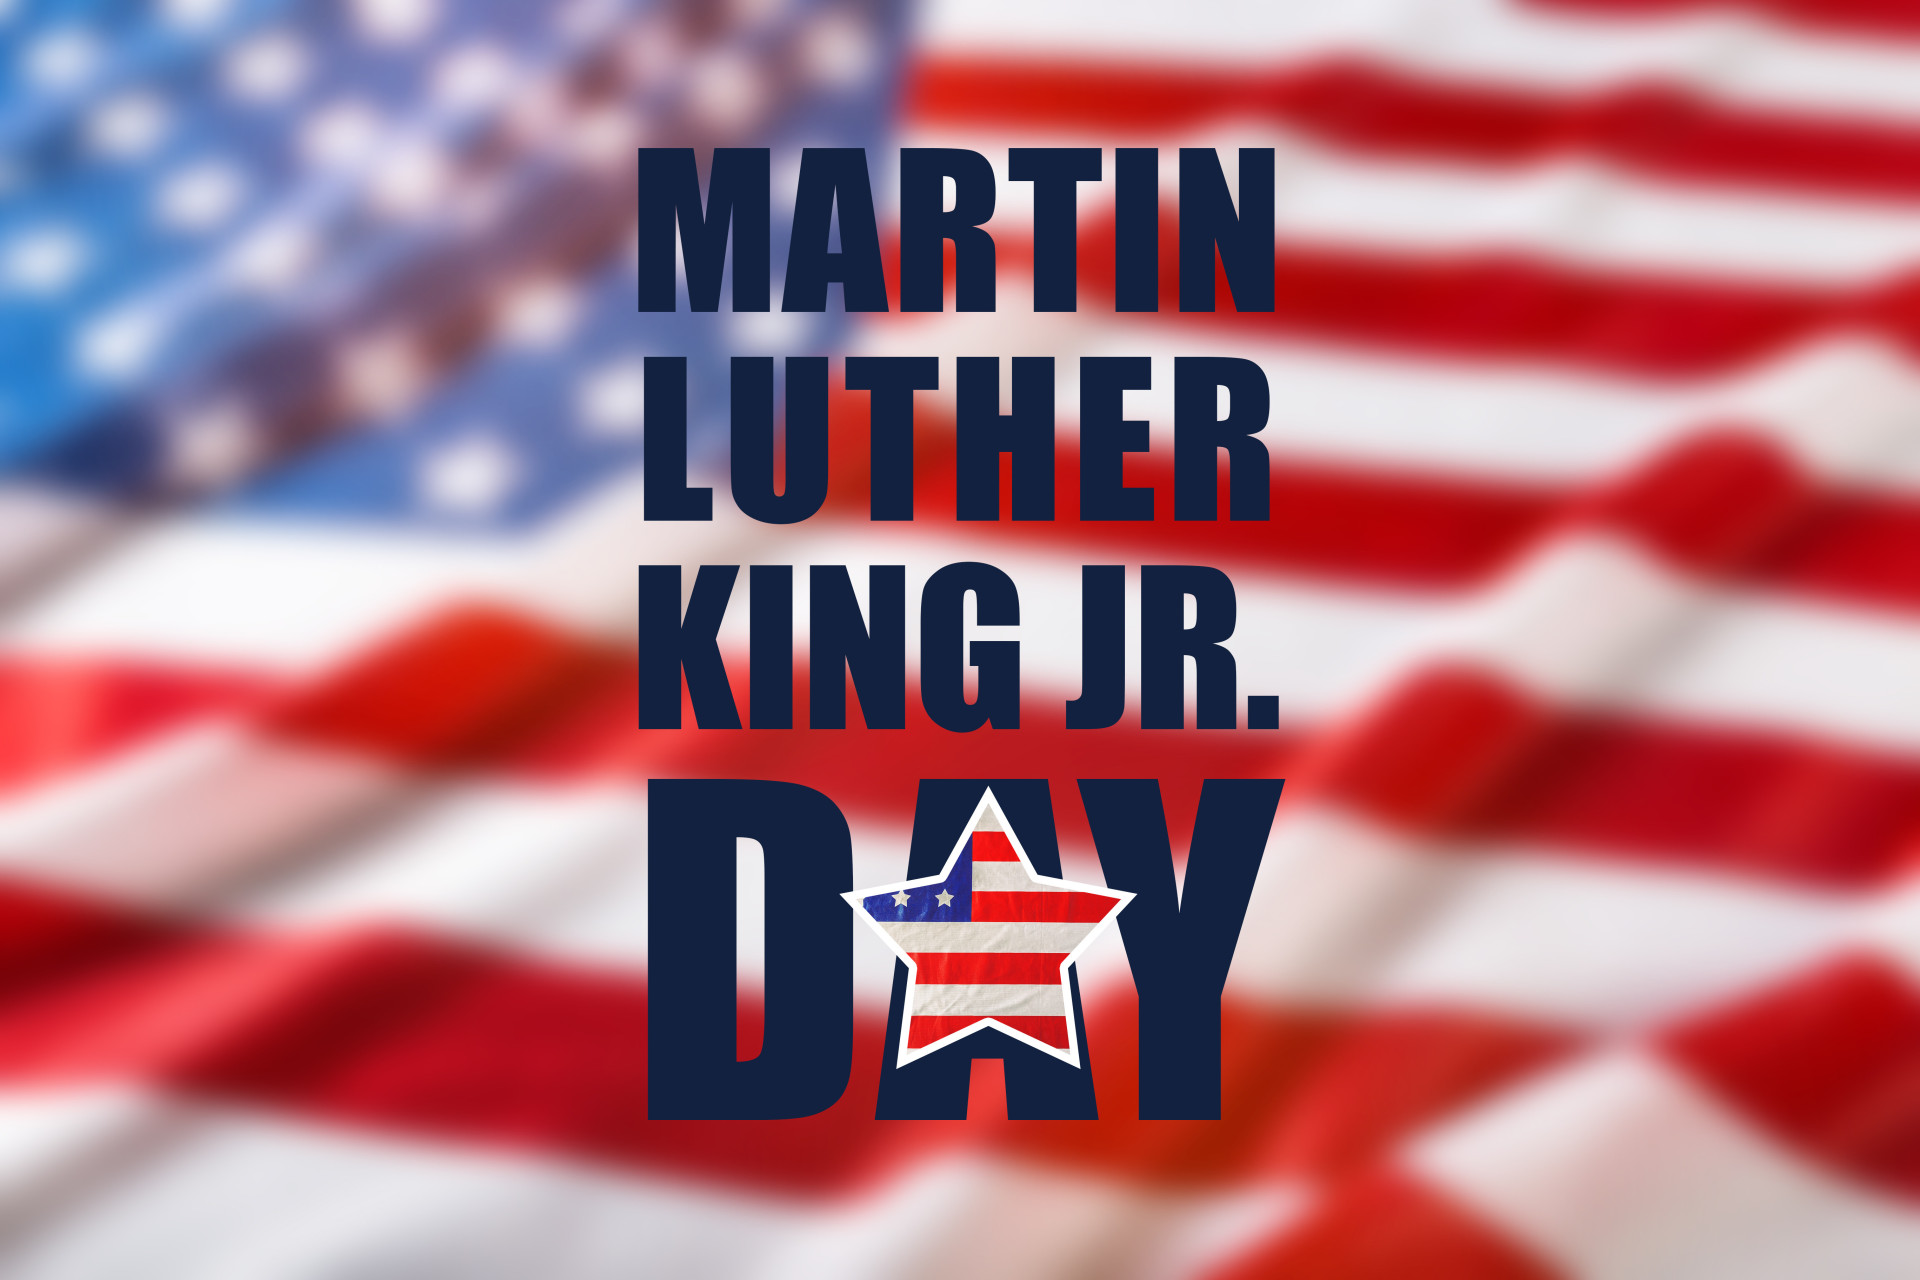 <p>Marking his birthday, MLK Day is observed on the third Monday of January each year, and is an annual federal holiday.</p> <p>Now that you're here, have <a href="https://www.starsinsider.com/travel/197503/a-look-back-at-1968-what-was-life-like-50-years-ago">a look back at 1968</a>.</p><p><a href="https://www.msn.com/en-us/community/channel/vid-7xx8mnucu55yw63we9va2gwr7uihbxwc68fxqp25x6tg4ftibpra?cvid=94631541bc0f4f89bfd59158d696ad7e">Follow us and access great exclusive content every day</a></p>